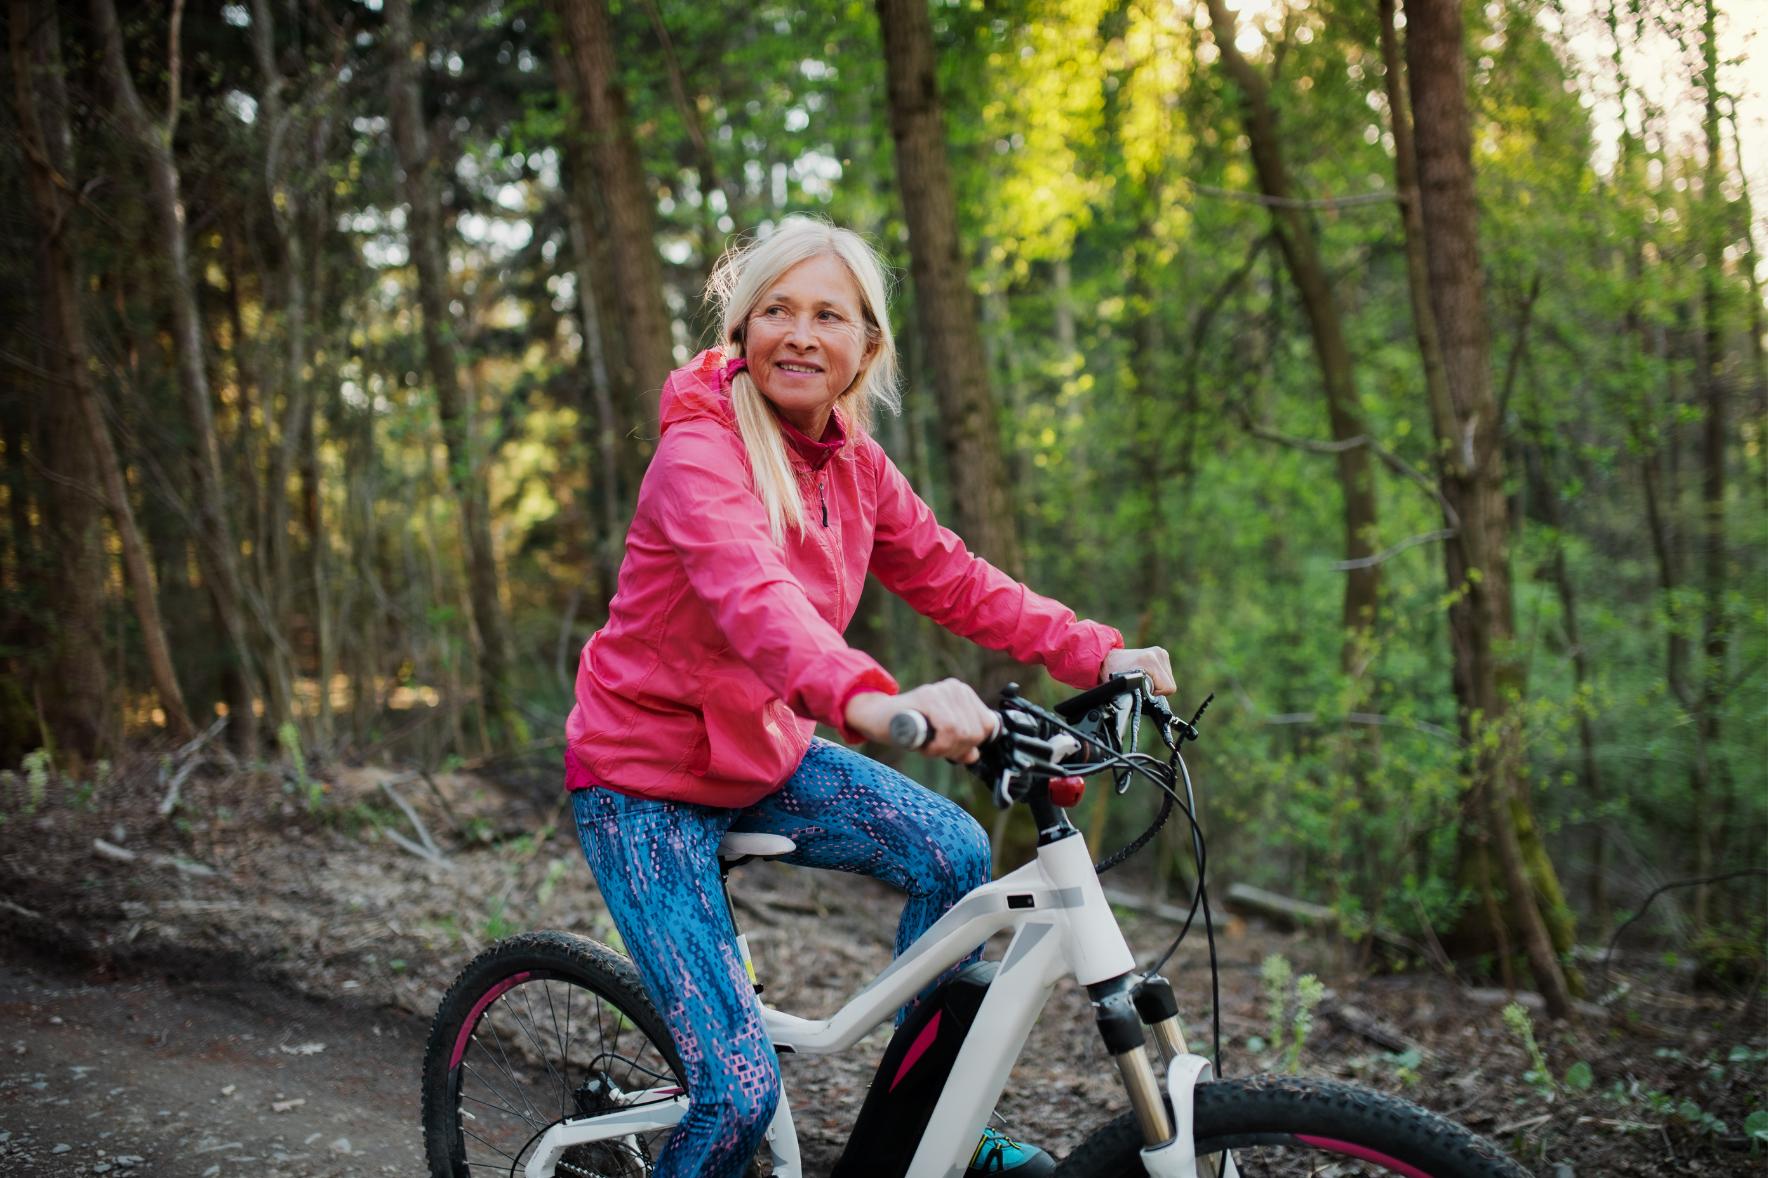 Riding ebikes can allow people to go further and more often - Keego Mobility